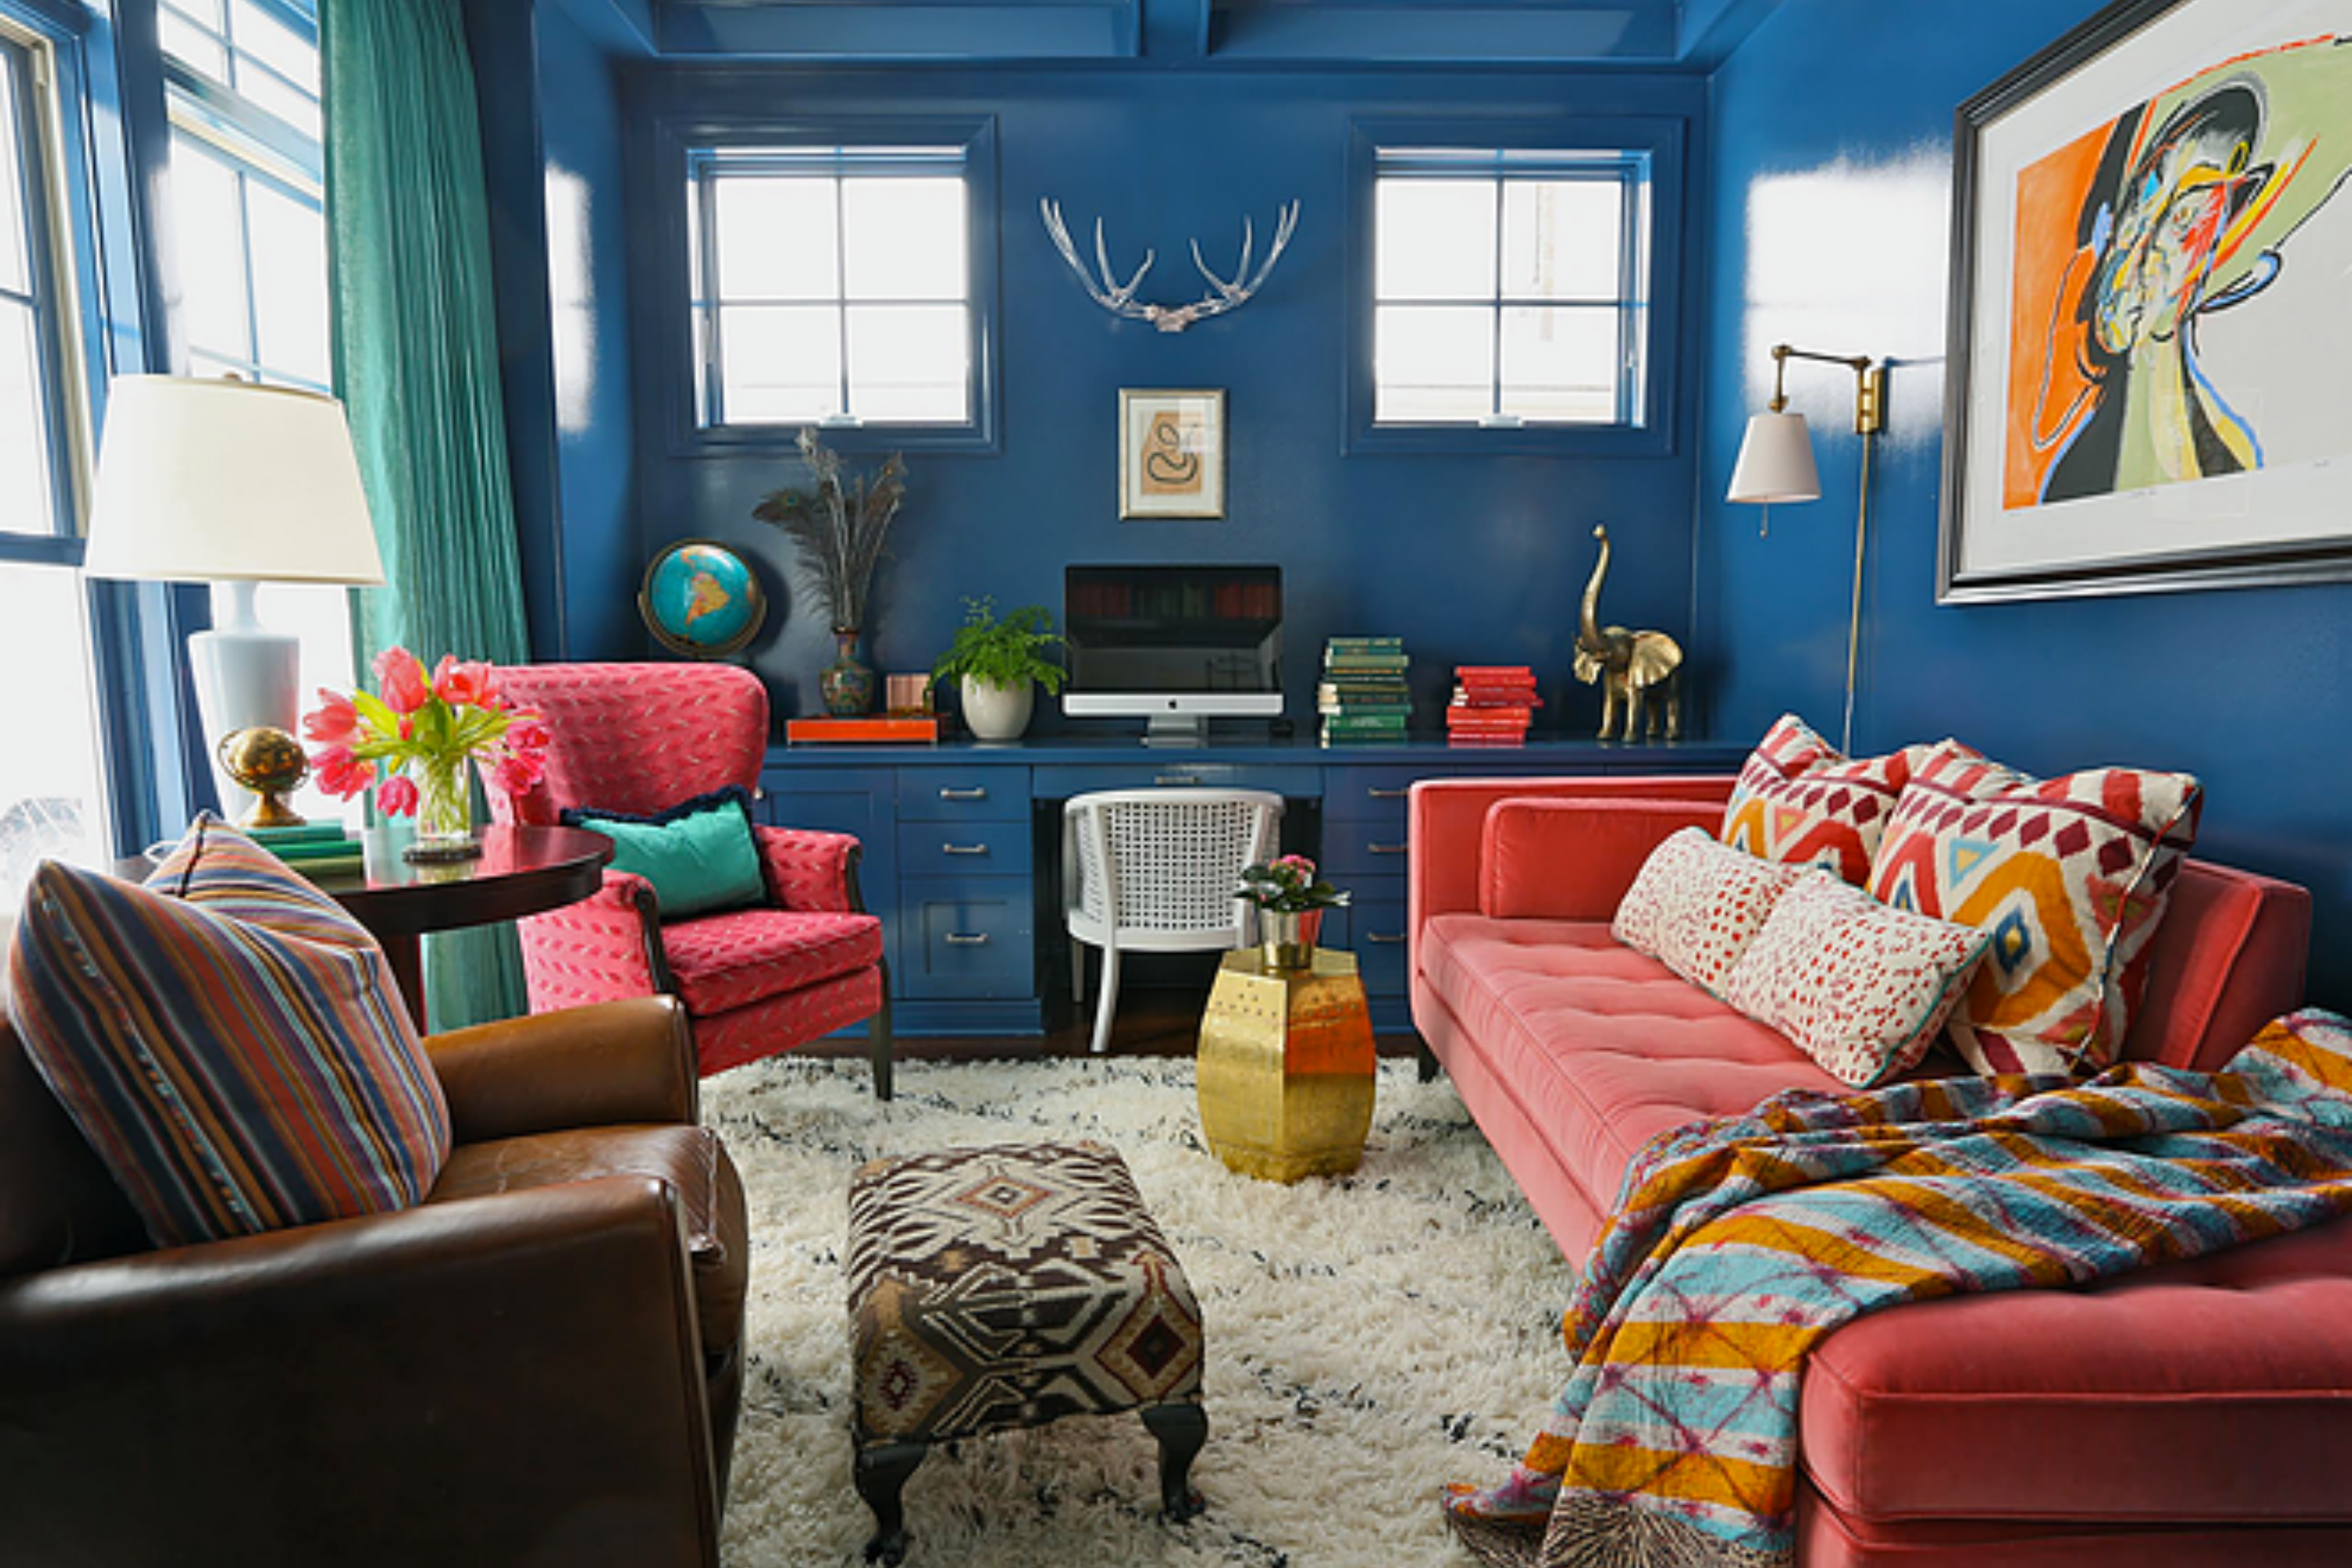 10 Bold Ideas for Decorating With Shades of Blue